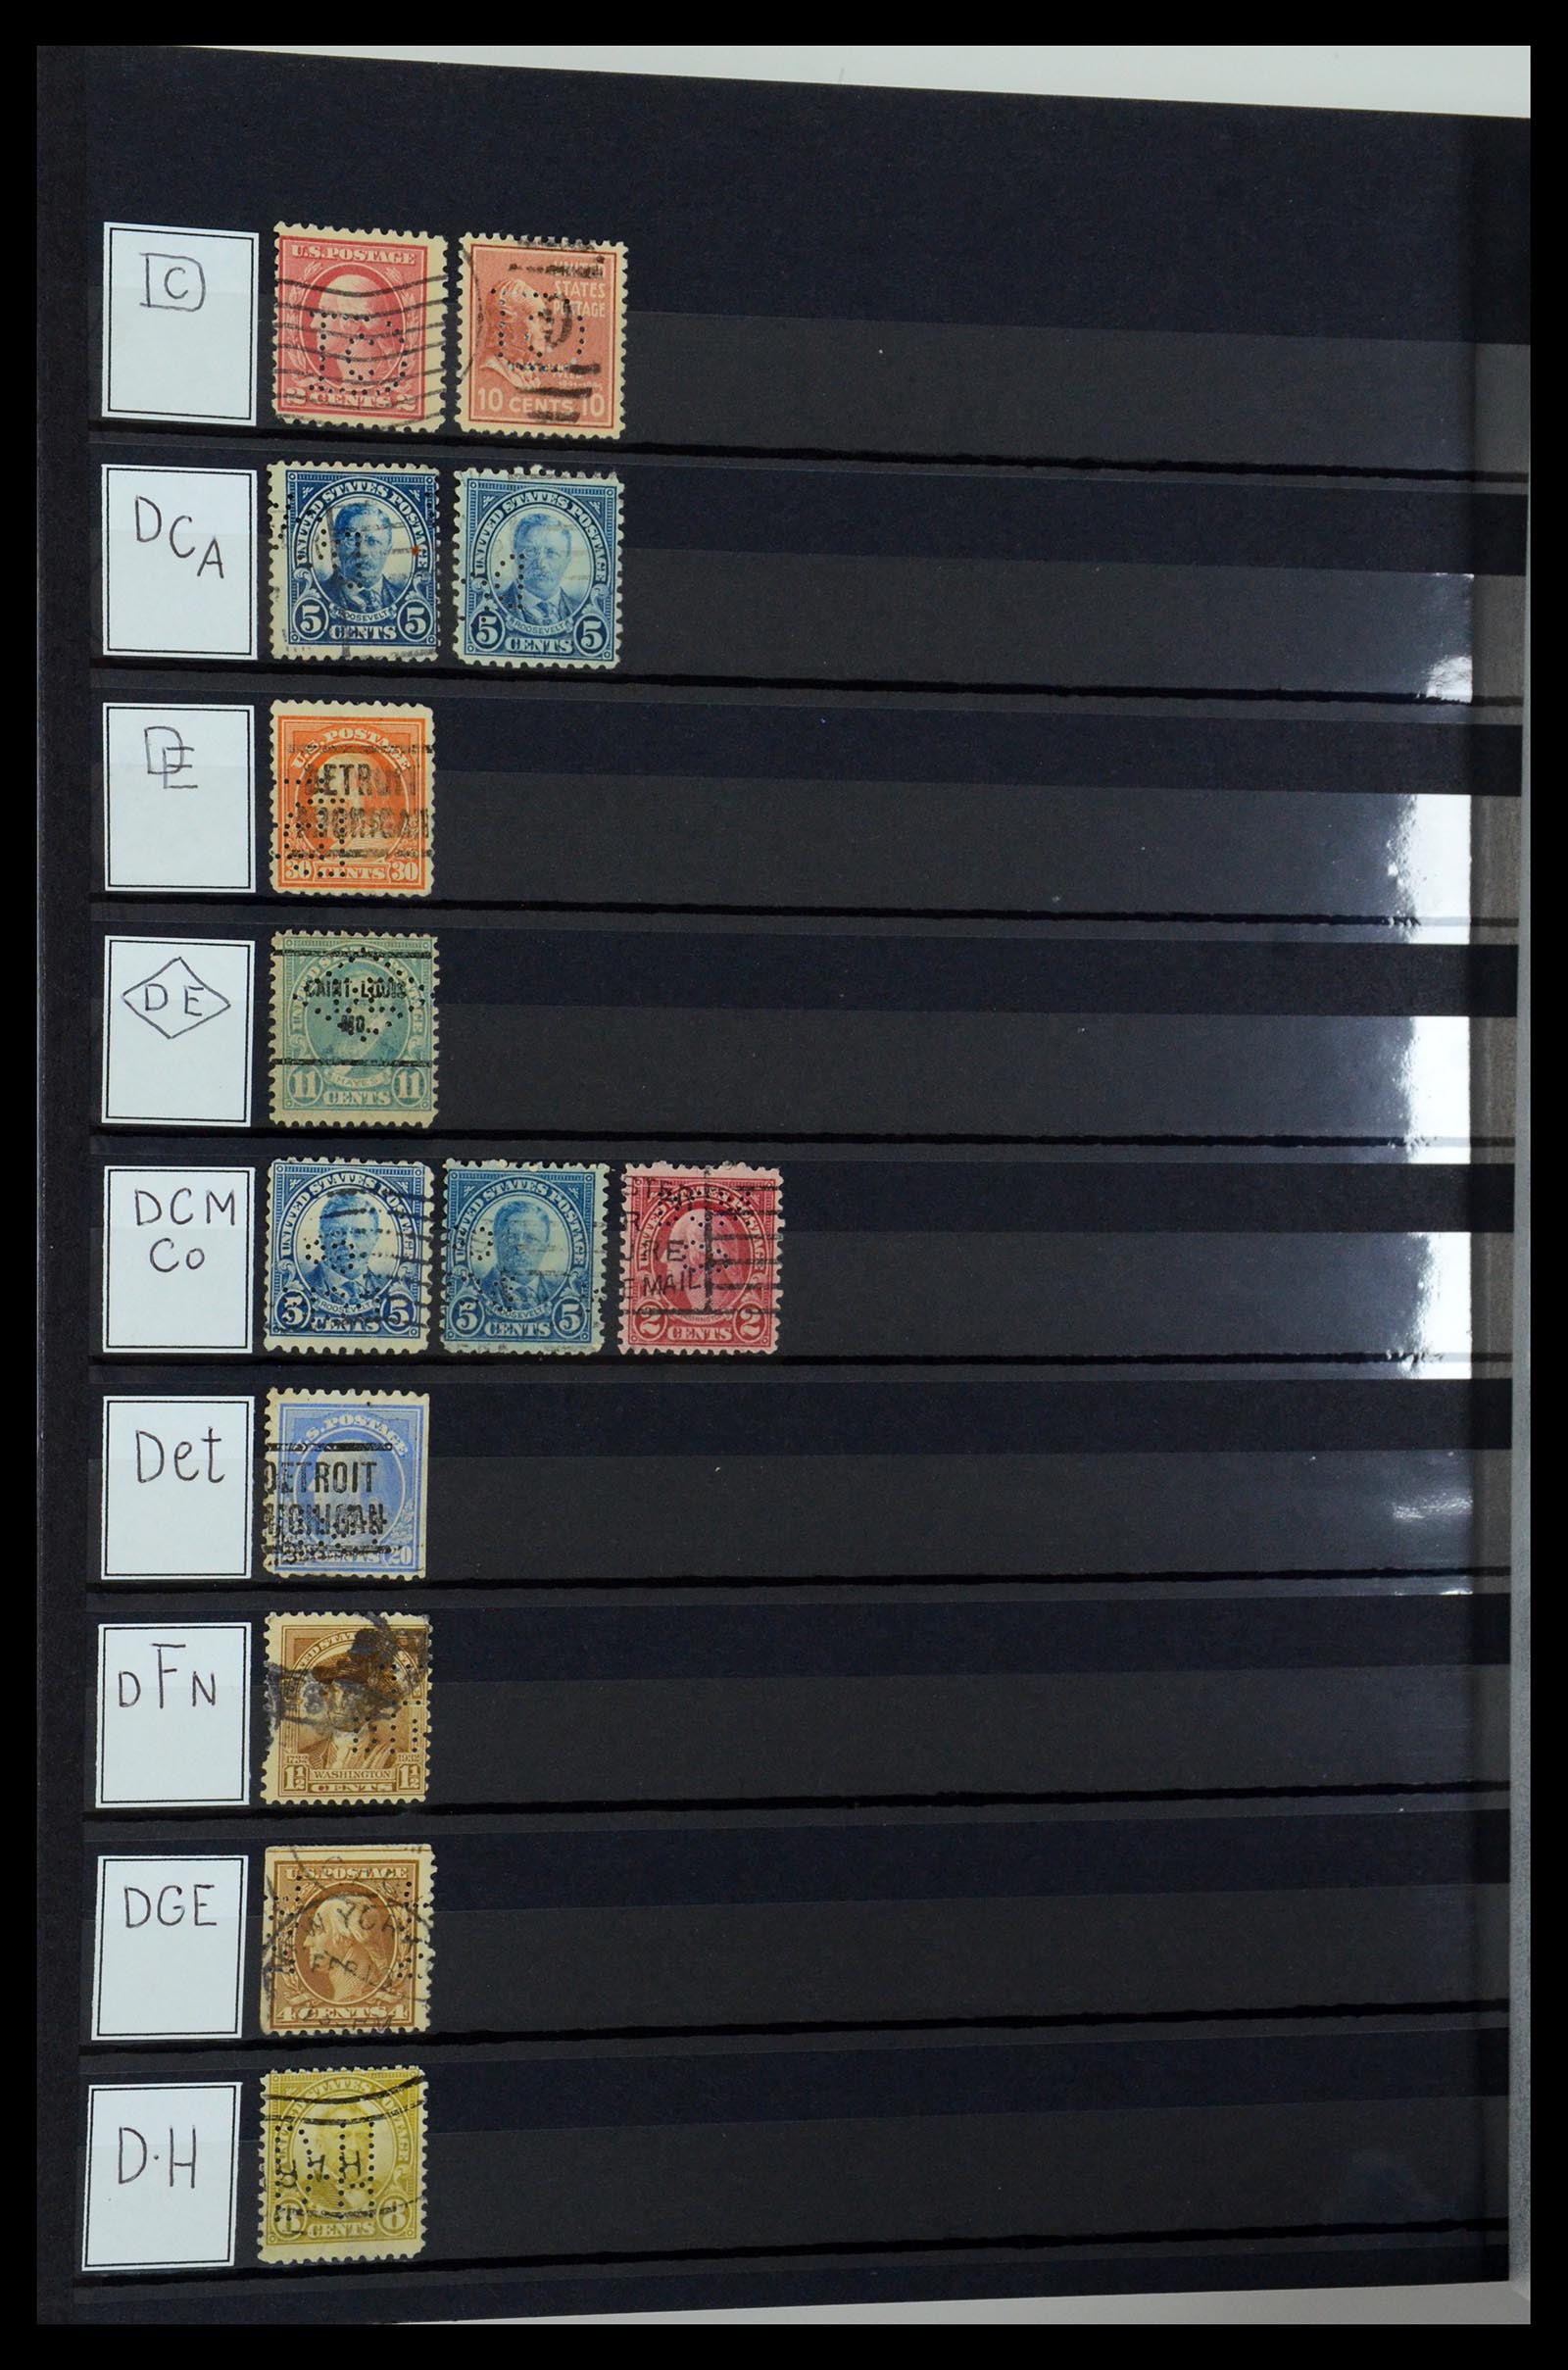 36388 036 - Stamp collection 36388 USA perfins.